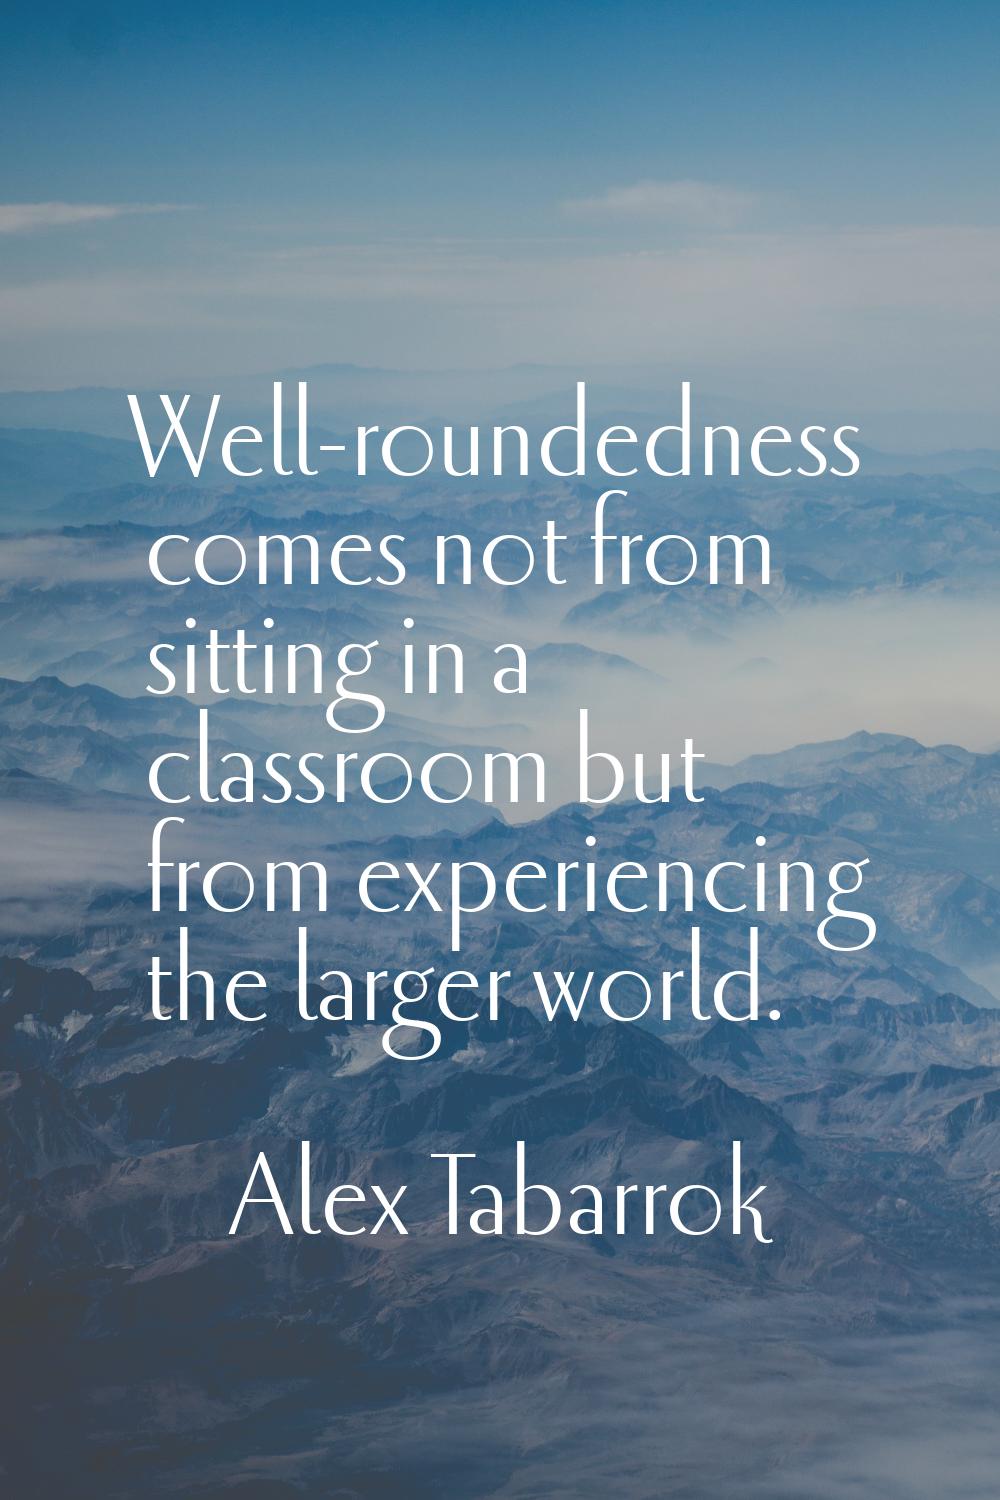 Well-roundedness comes not from sitting in a classroom but from experiencing the larger world.